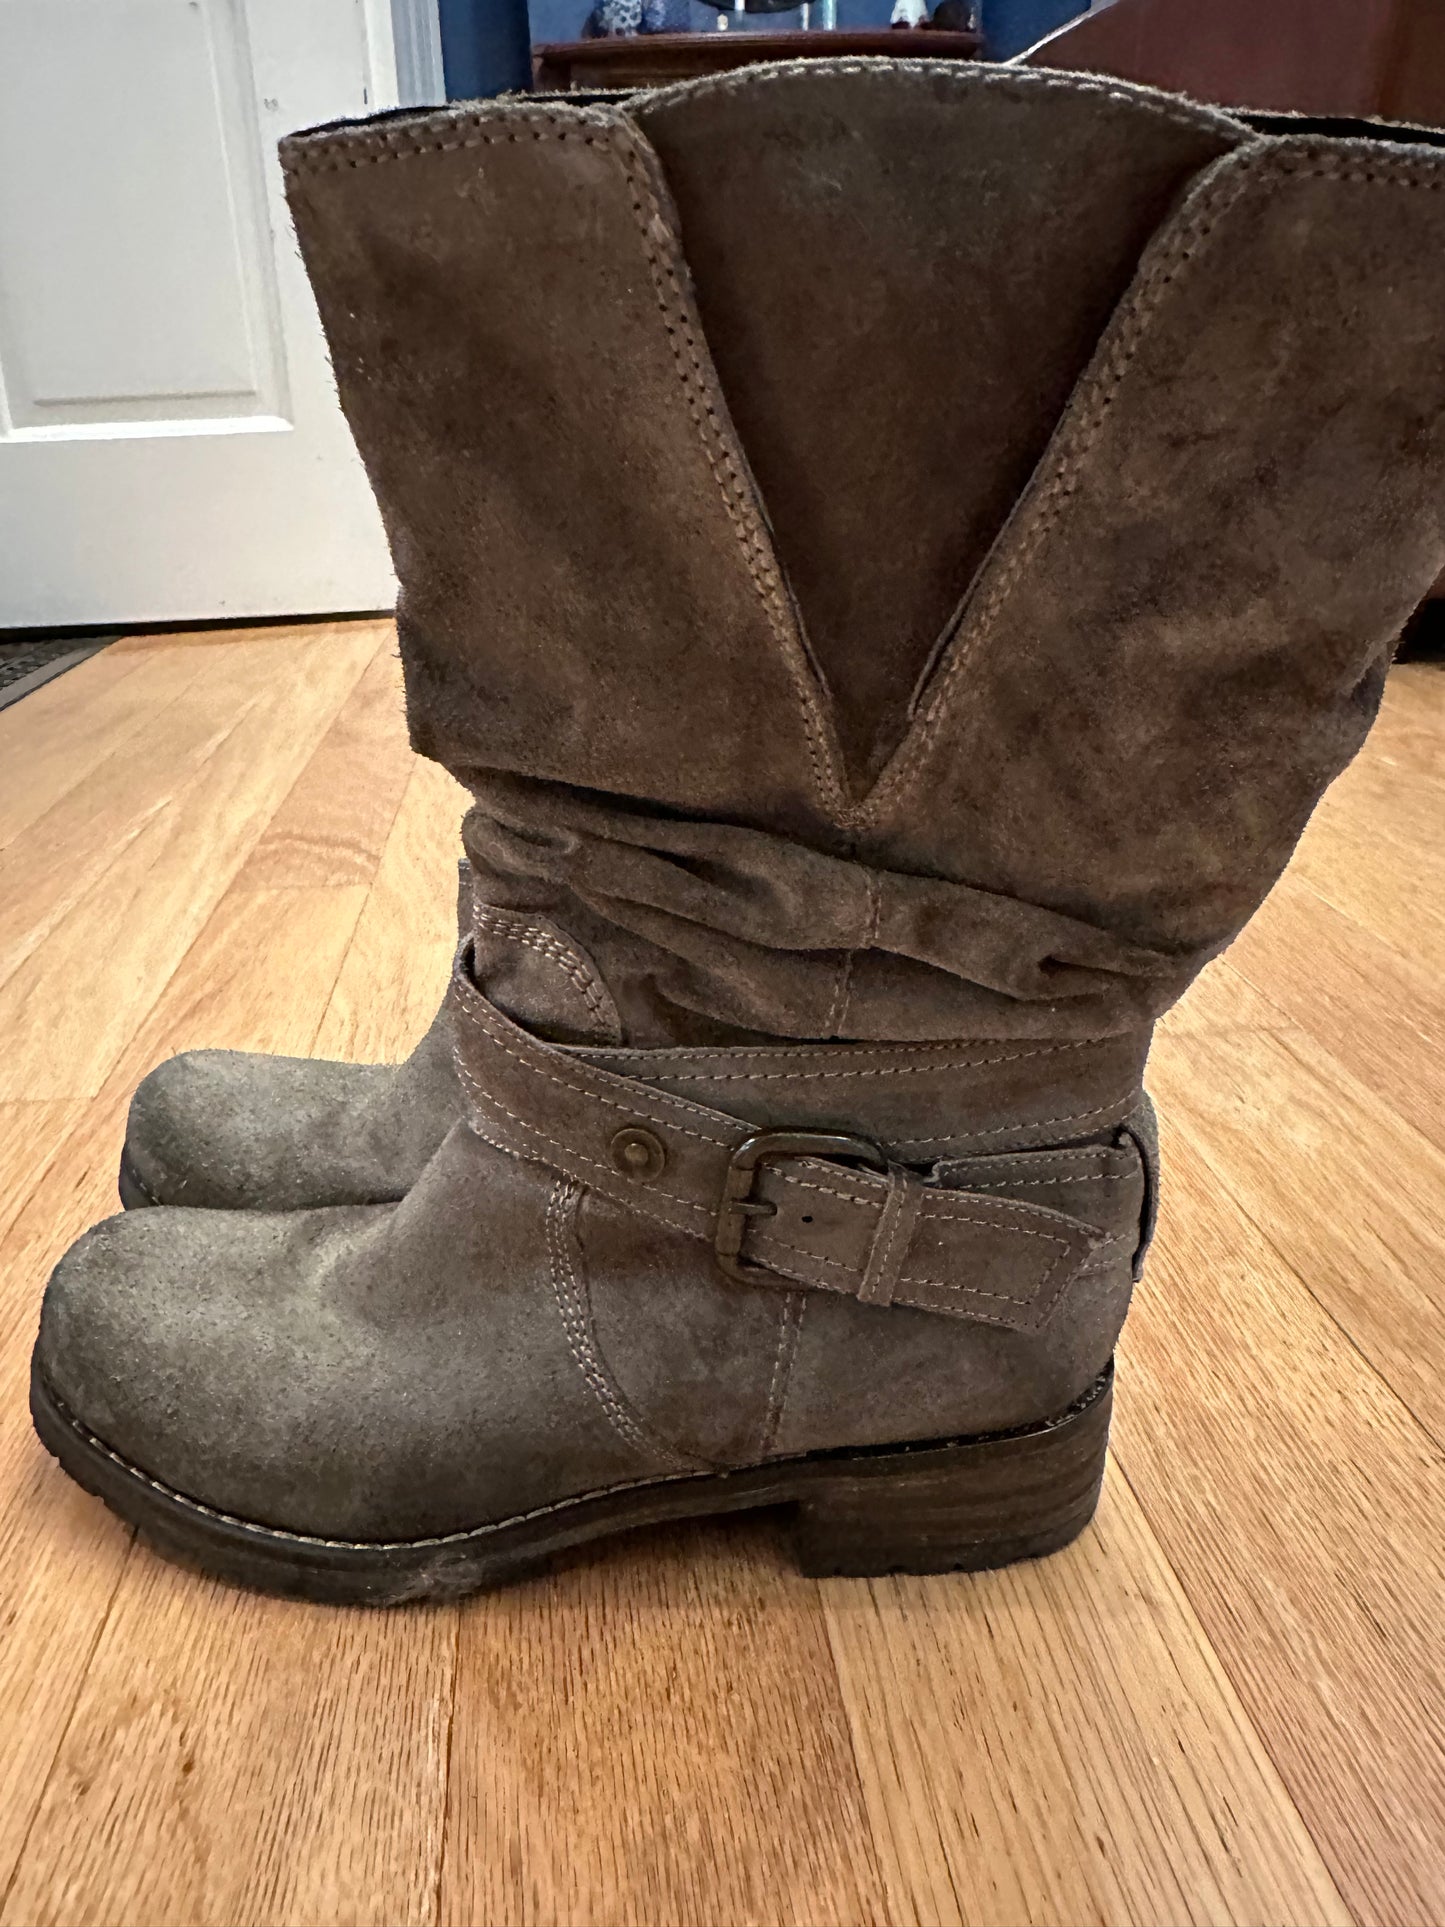 Clarks Boots size 6.5